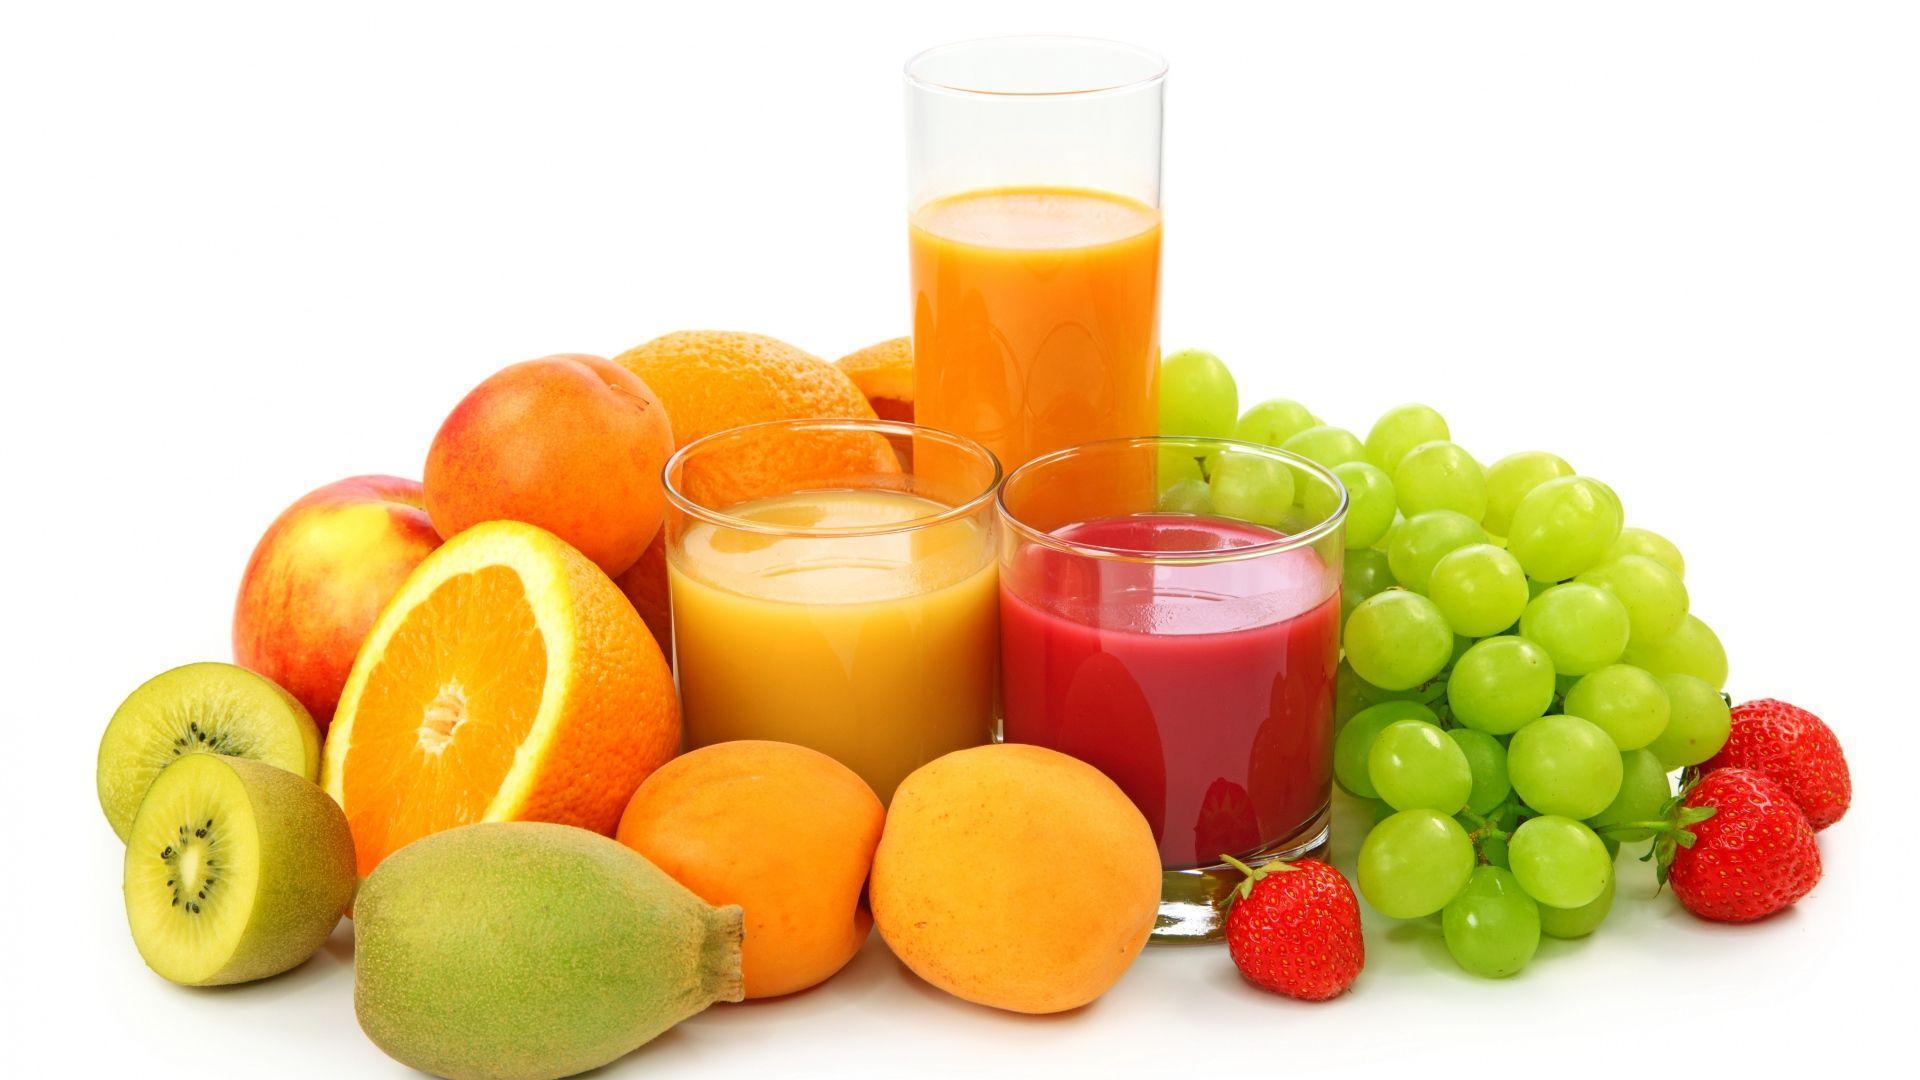 Fruit Juice Cute All Tumblr Wallpaper Android